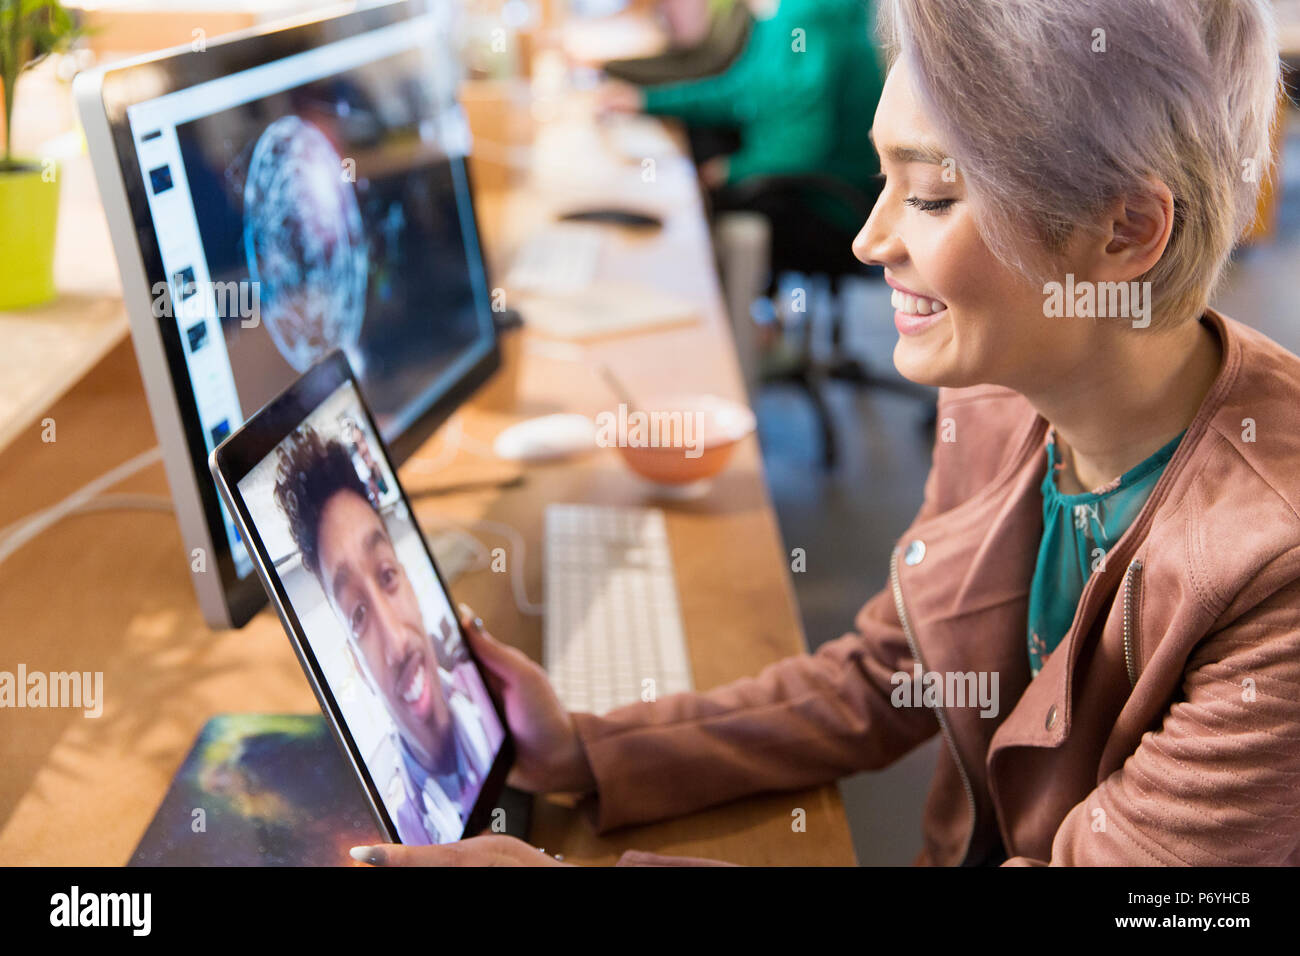 Creative businesswoman video chatting with colleague on digital tablet in office Stock Photo